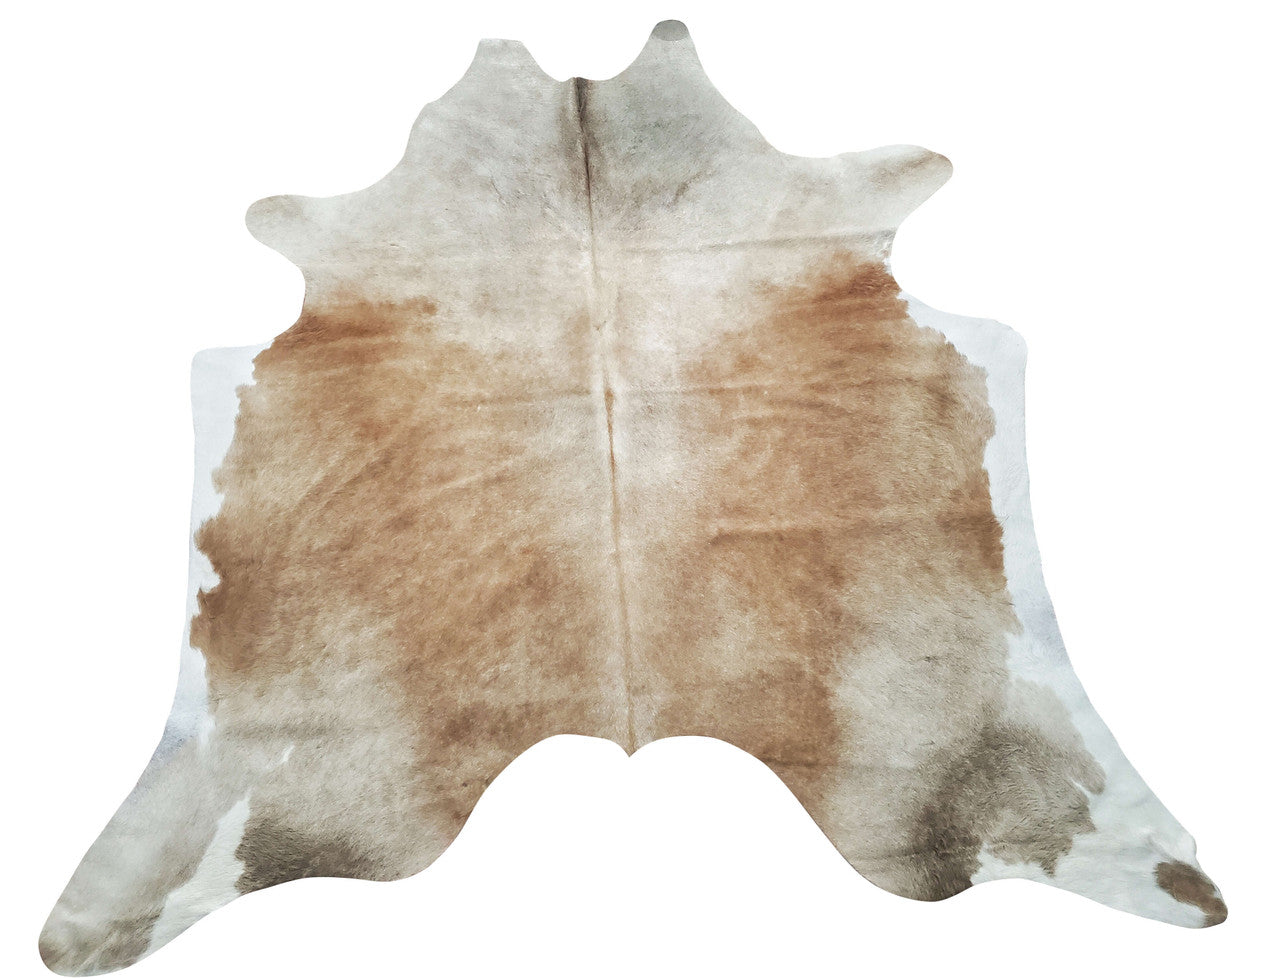 Planning to buy a new cowhide rugs, we have in all sizes and colors in premium quality and make your interior aesthetic. 

